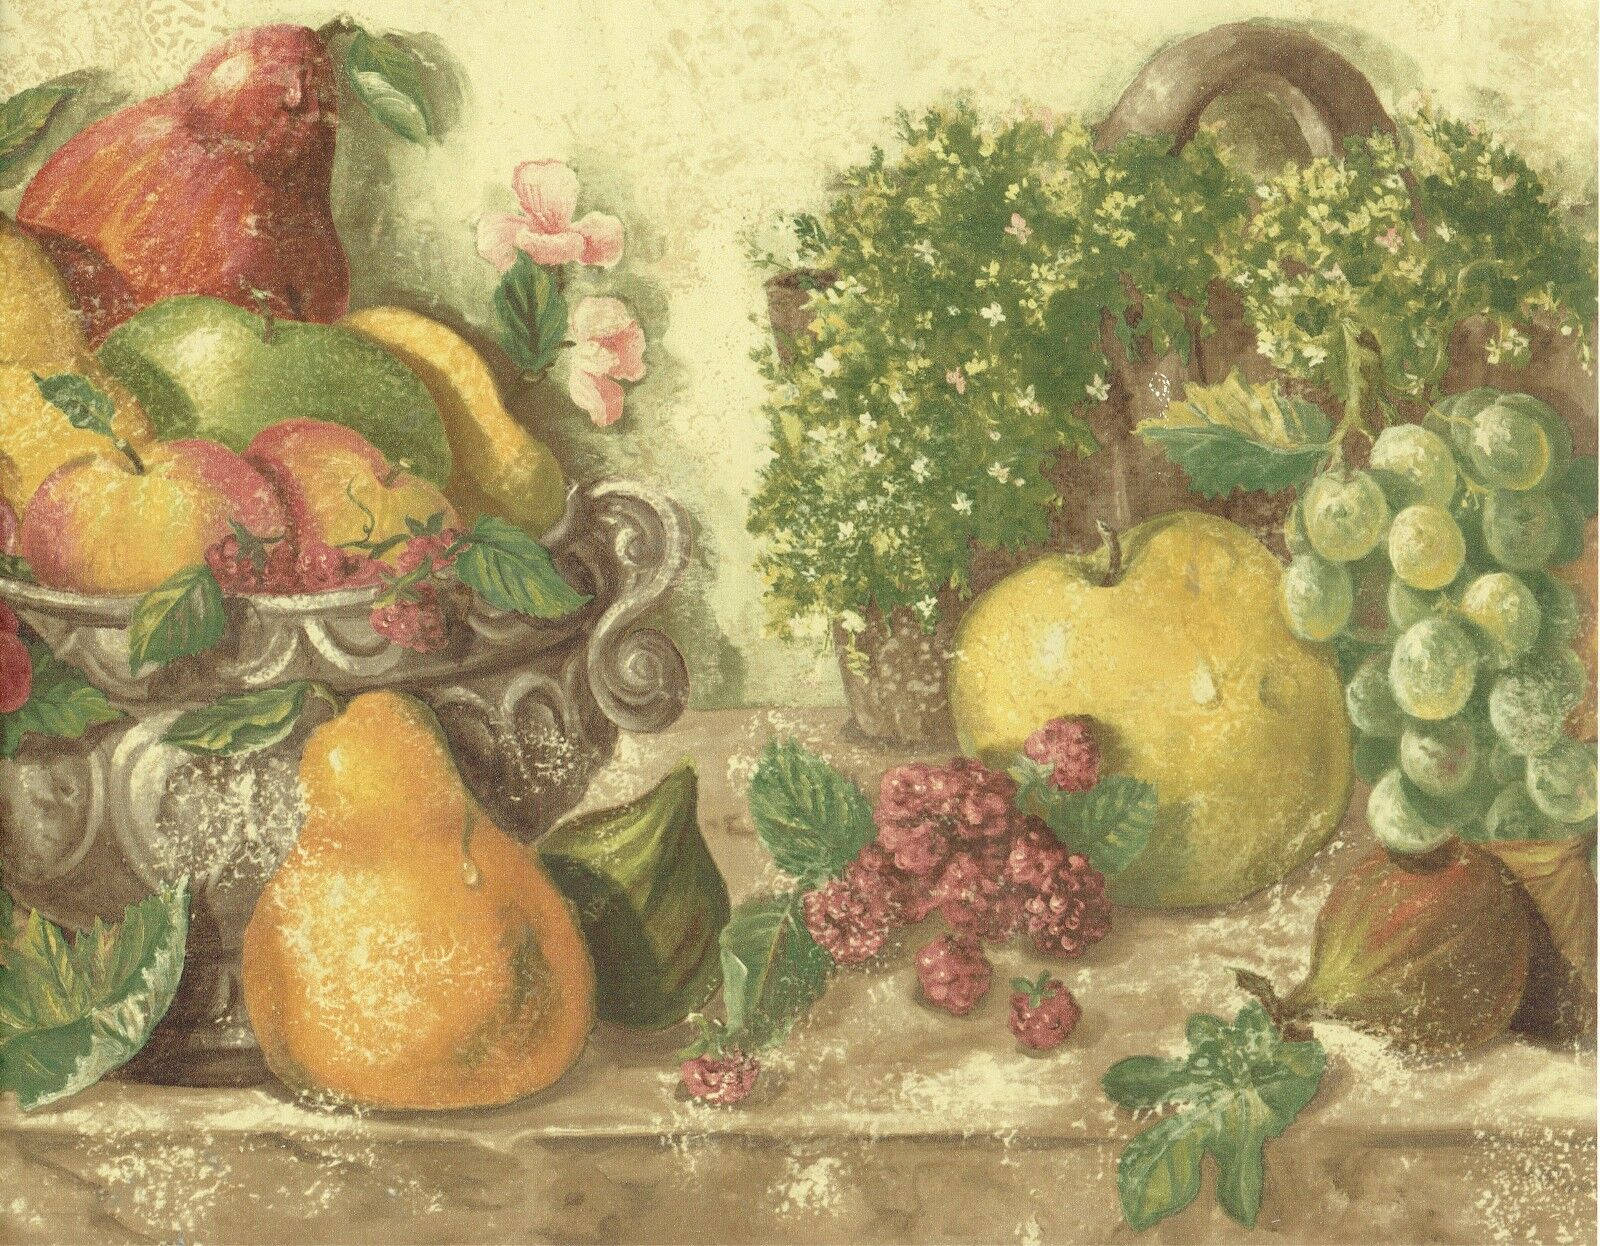 Pear Fruits Painting Wallpaper